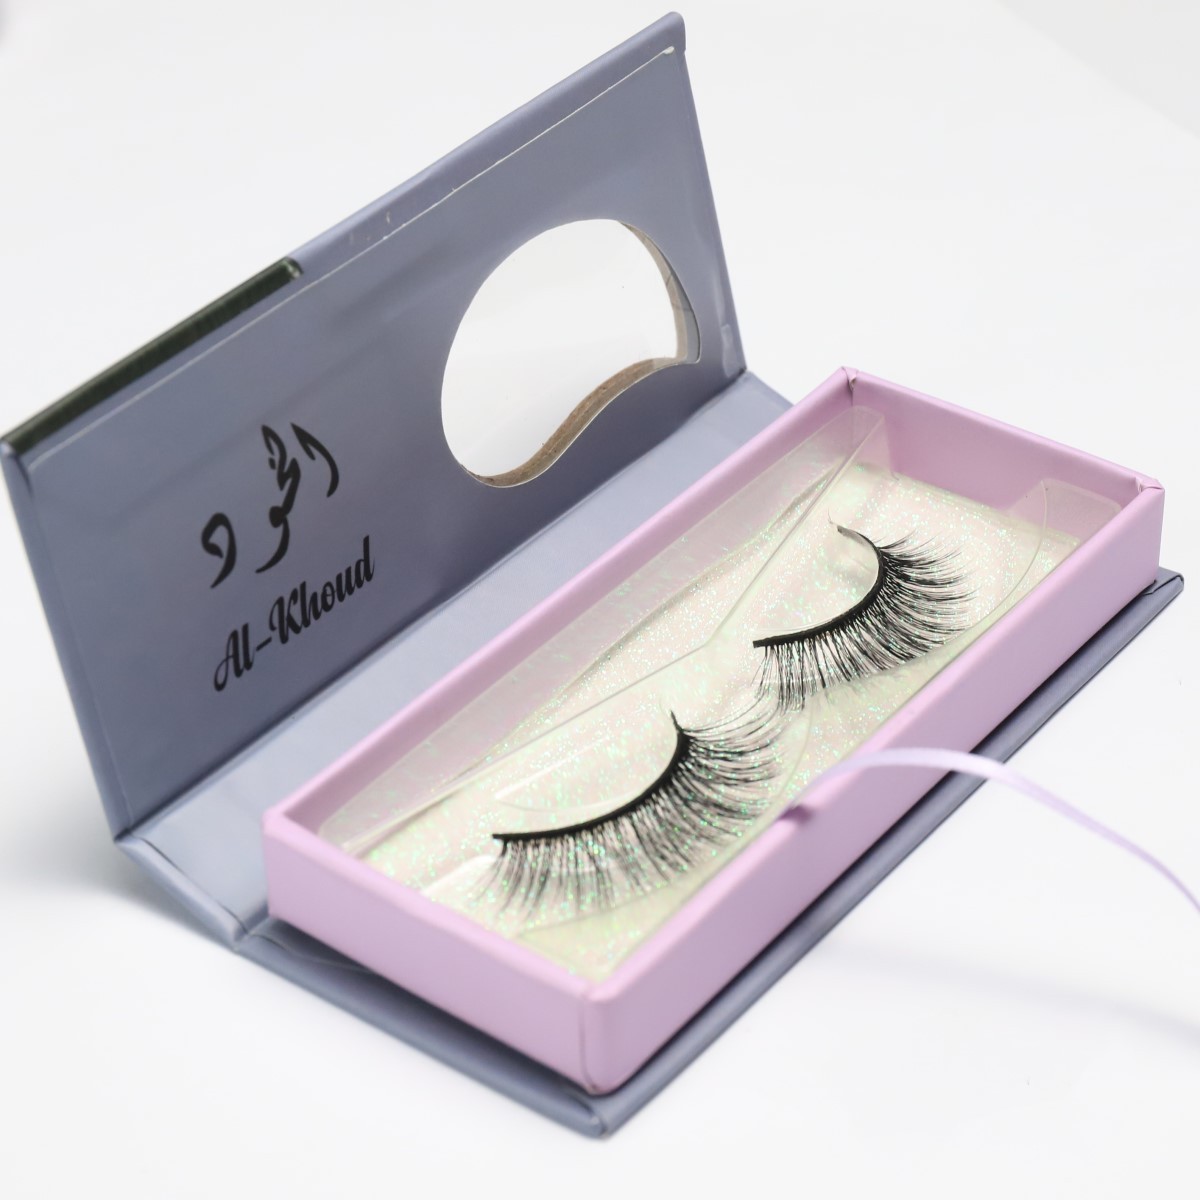 Events & Occasions: Which lashes to wear?